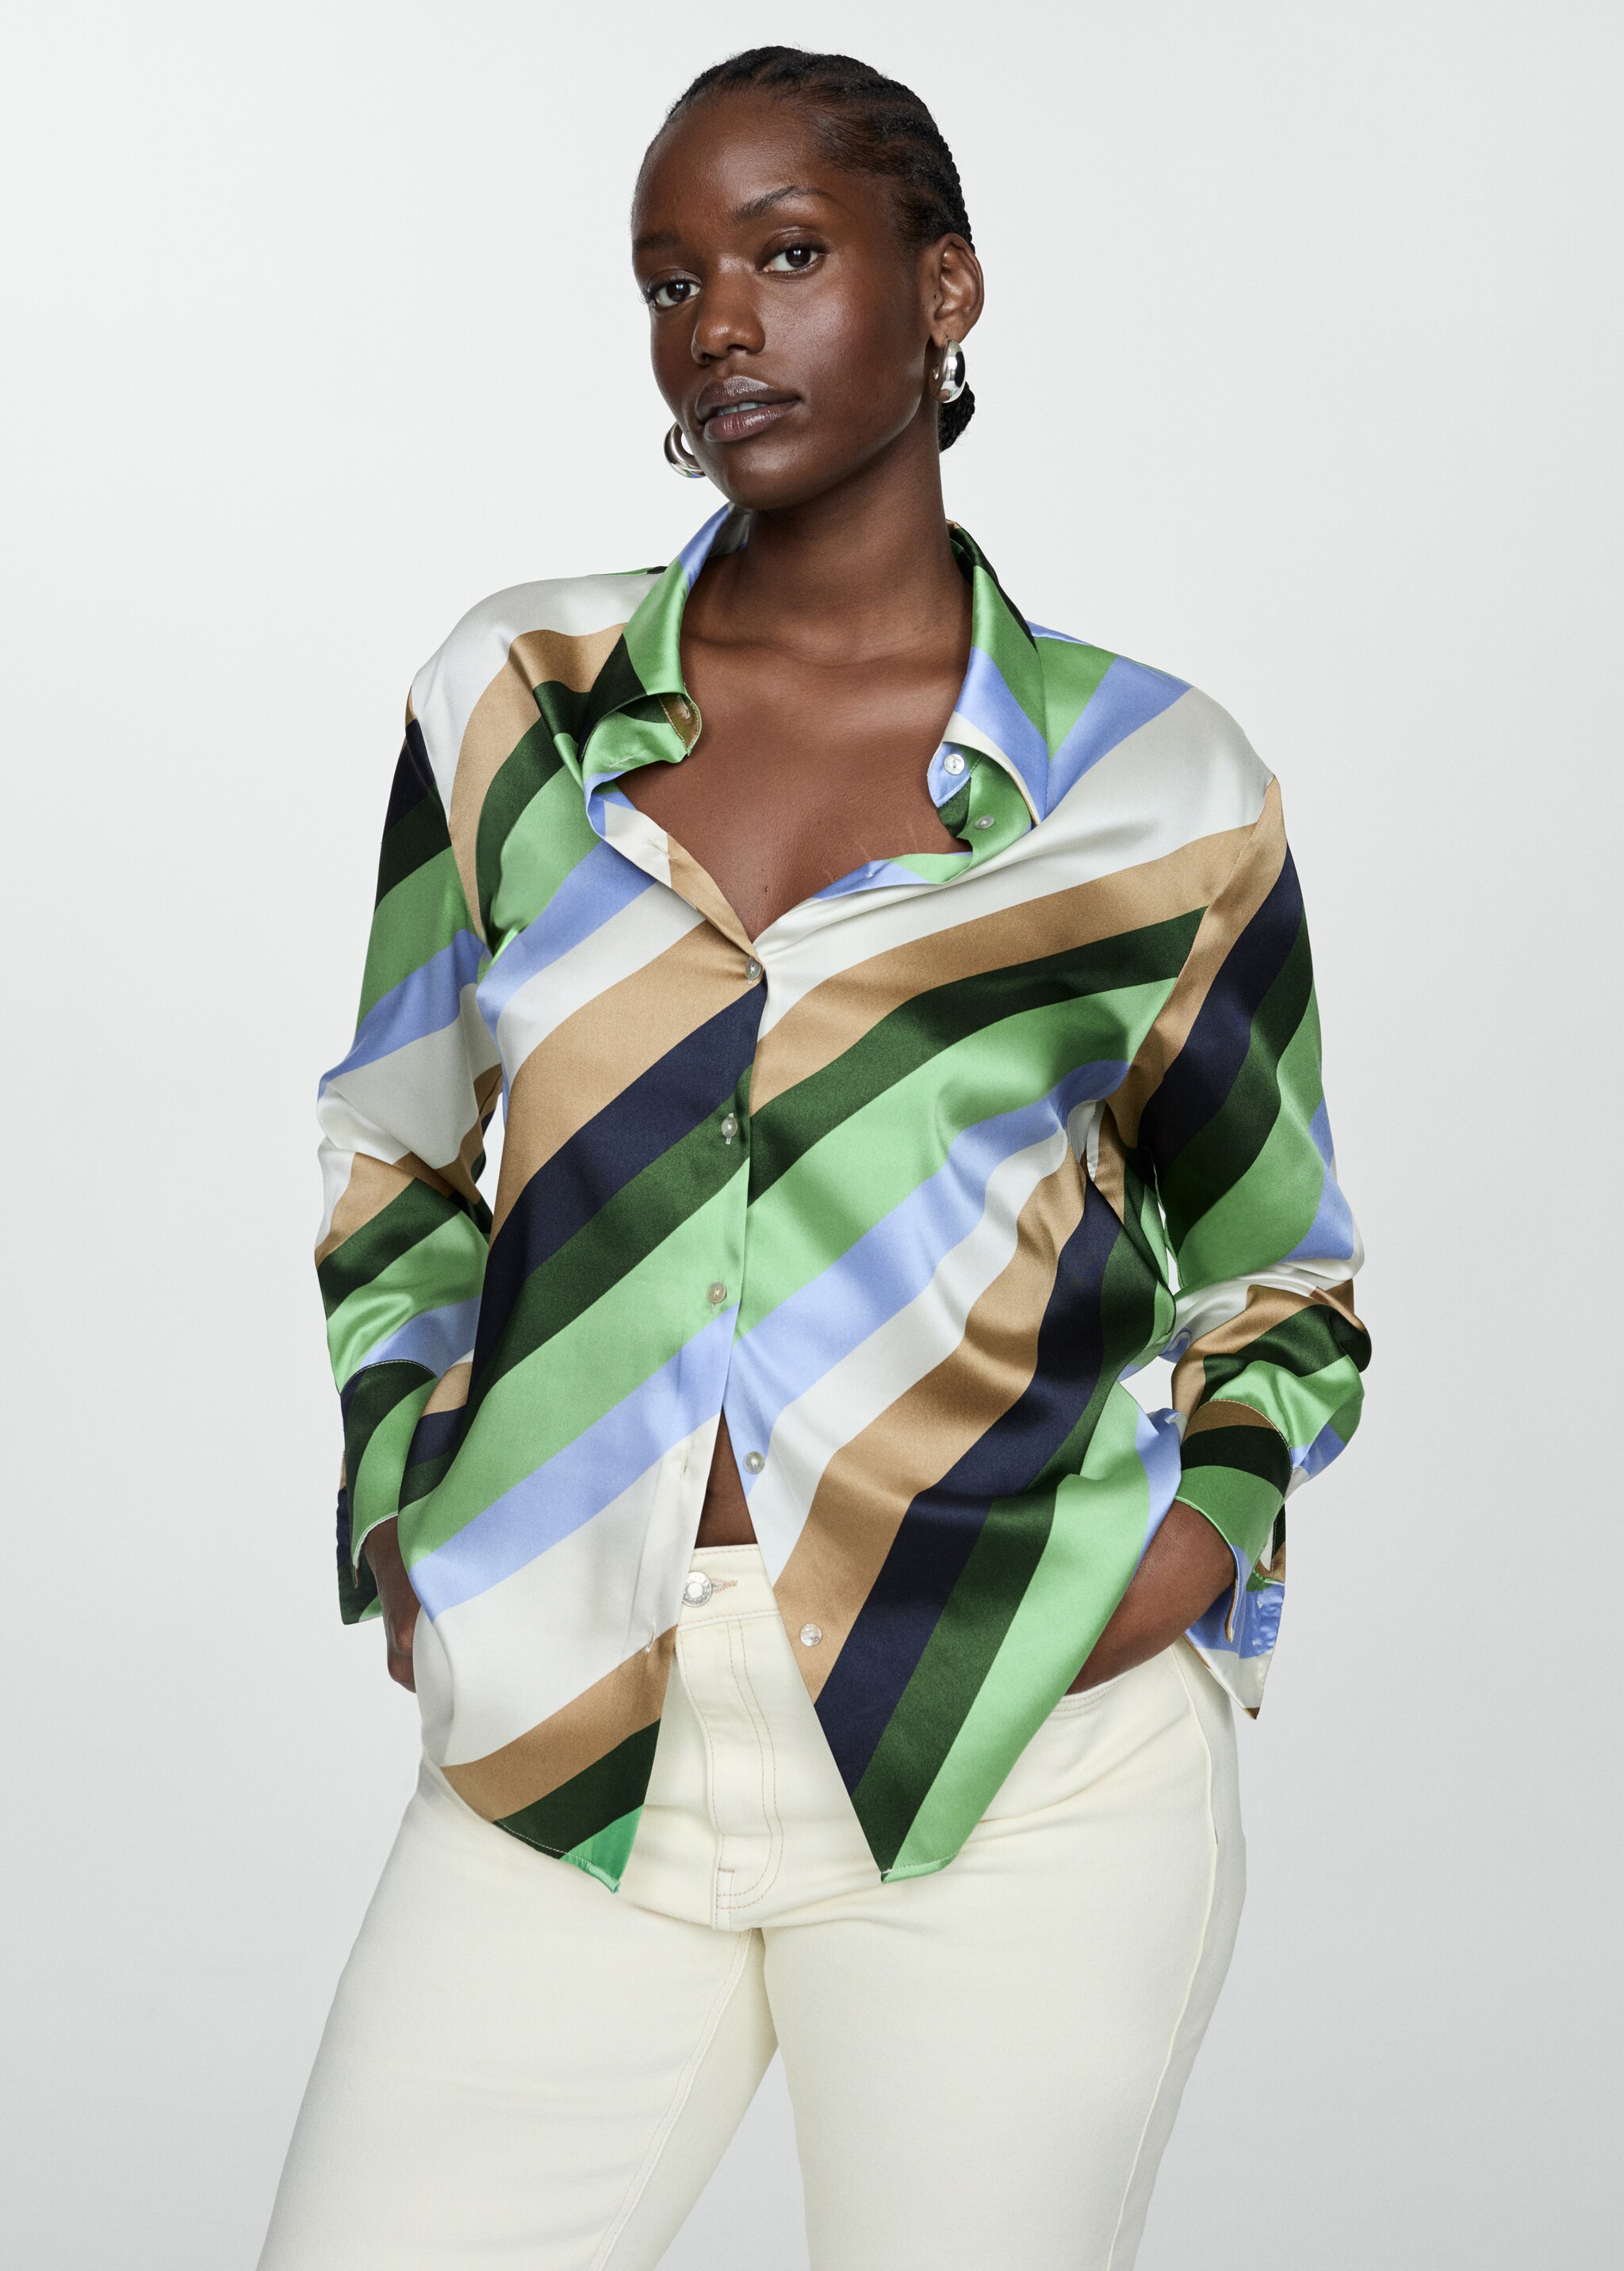 Satin striped shirt - Details of the article 5